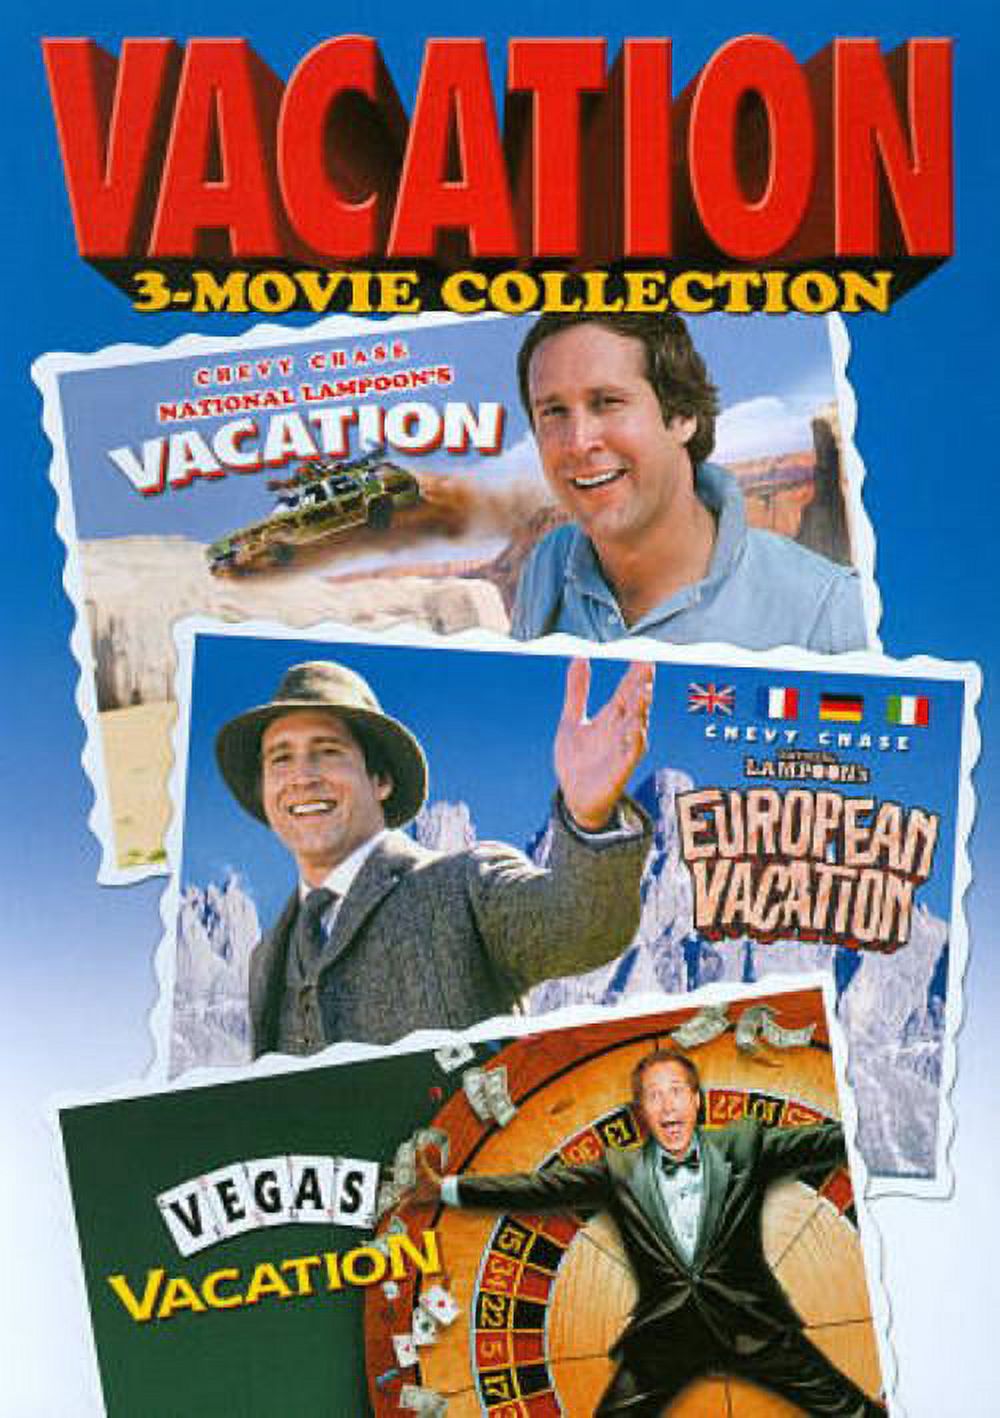 National Lampoon Vacation 3-Movie Collection (DVD) - image 2 of 5